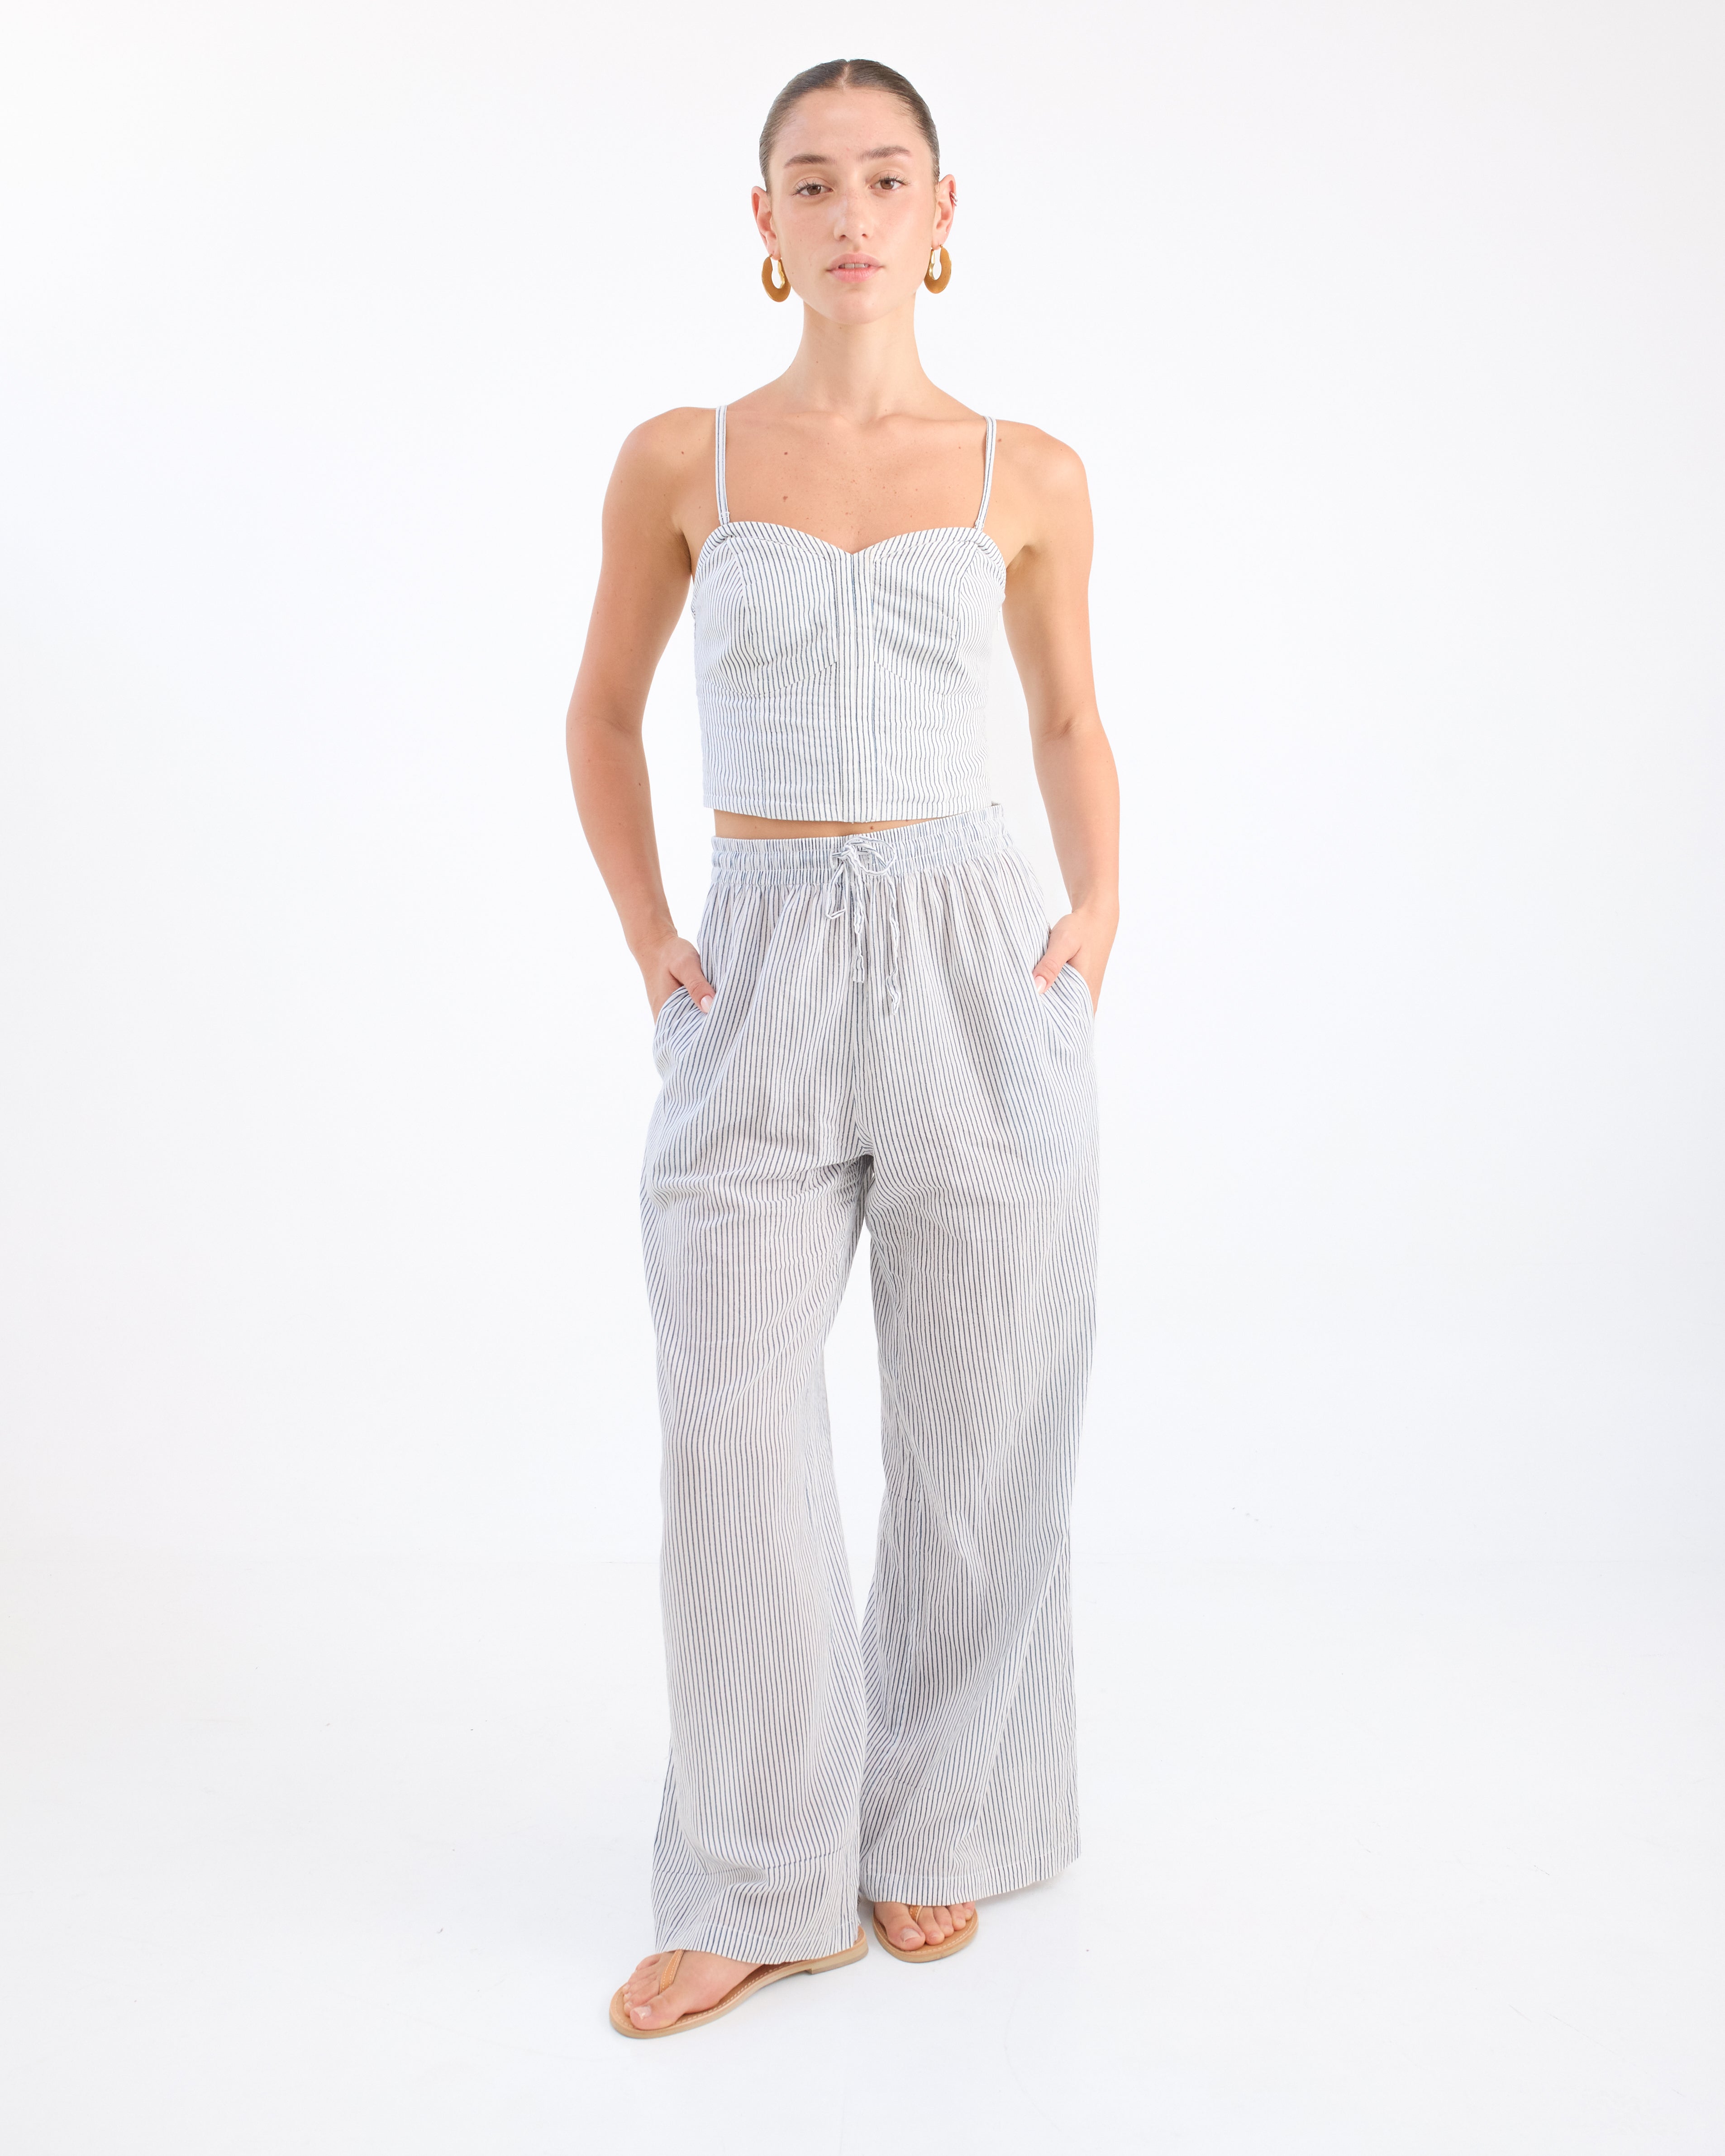 Palazzo Pants - Blue Stripe by Desert Queen